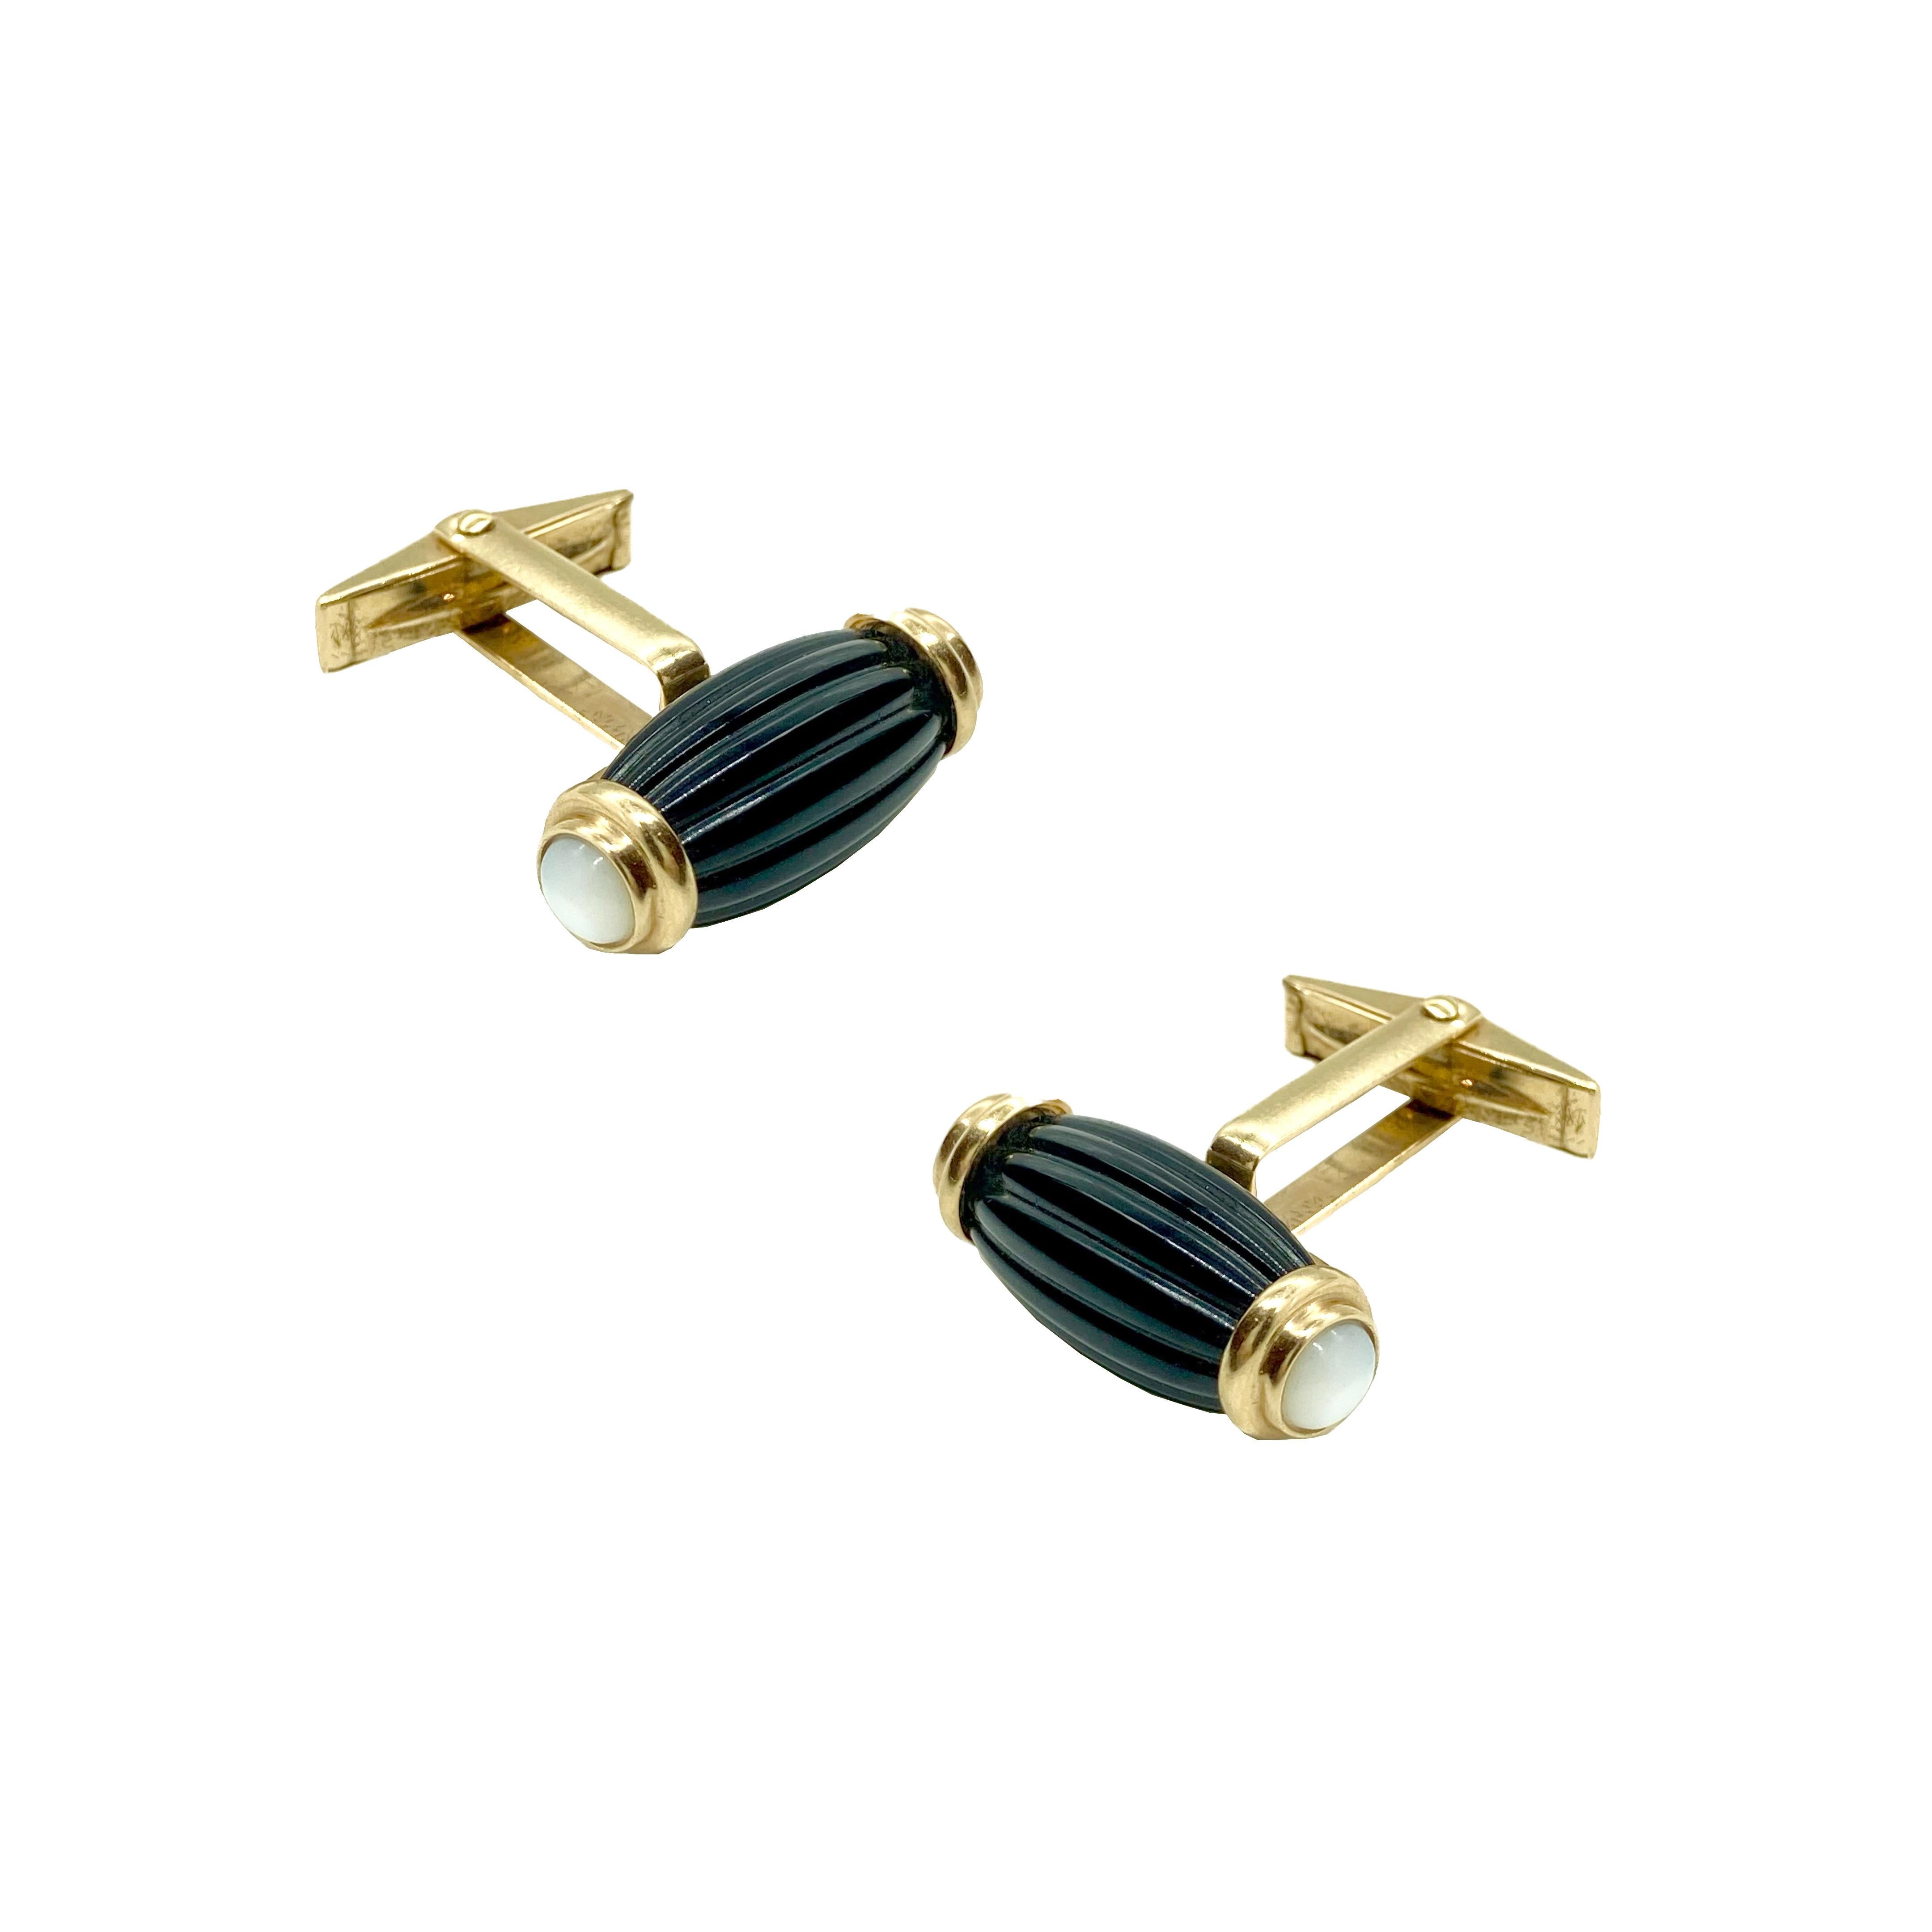 Chic gold cufflinks featuring a fluted onyx and mother of pearl design. Circa 1950.